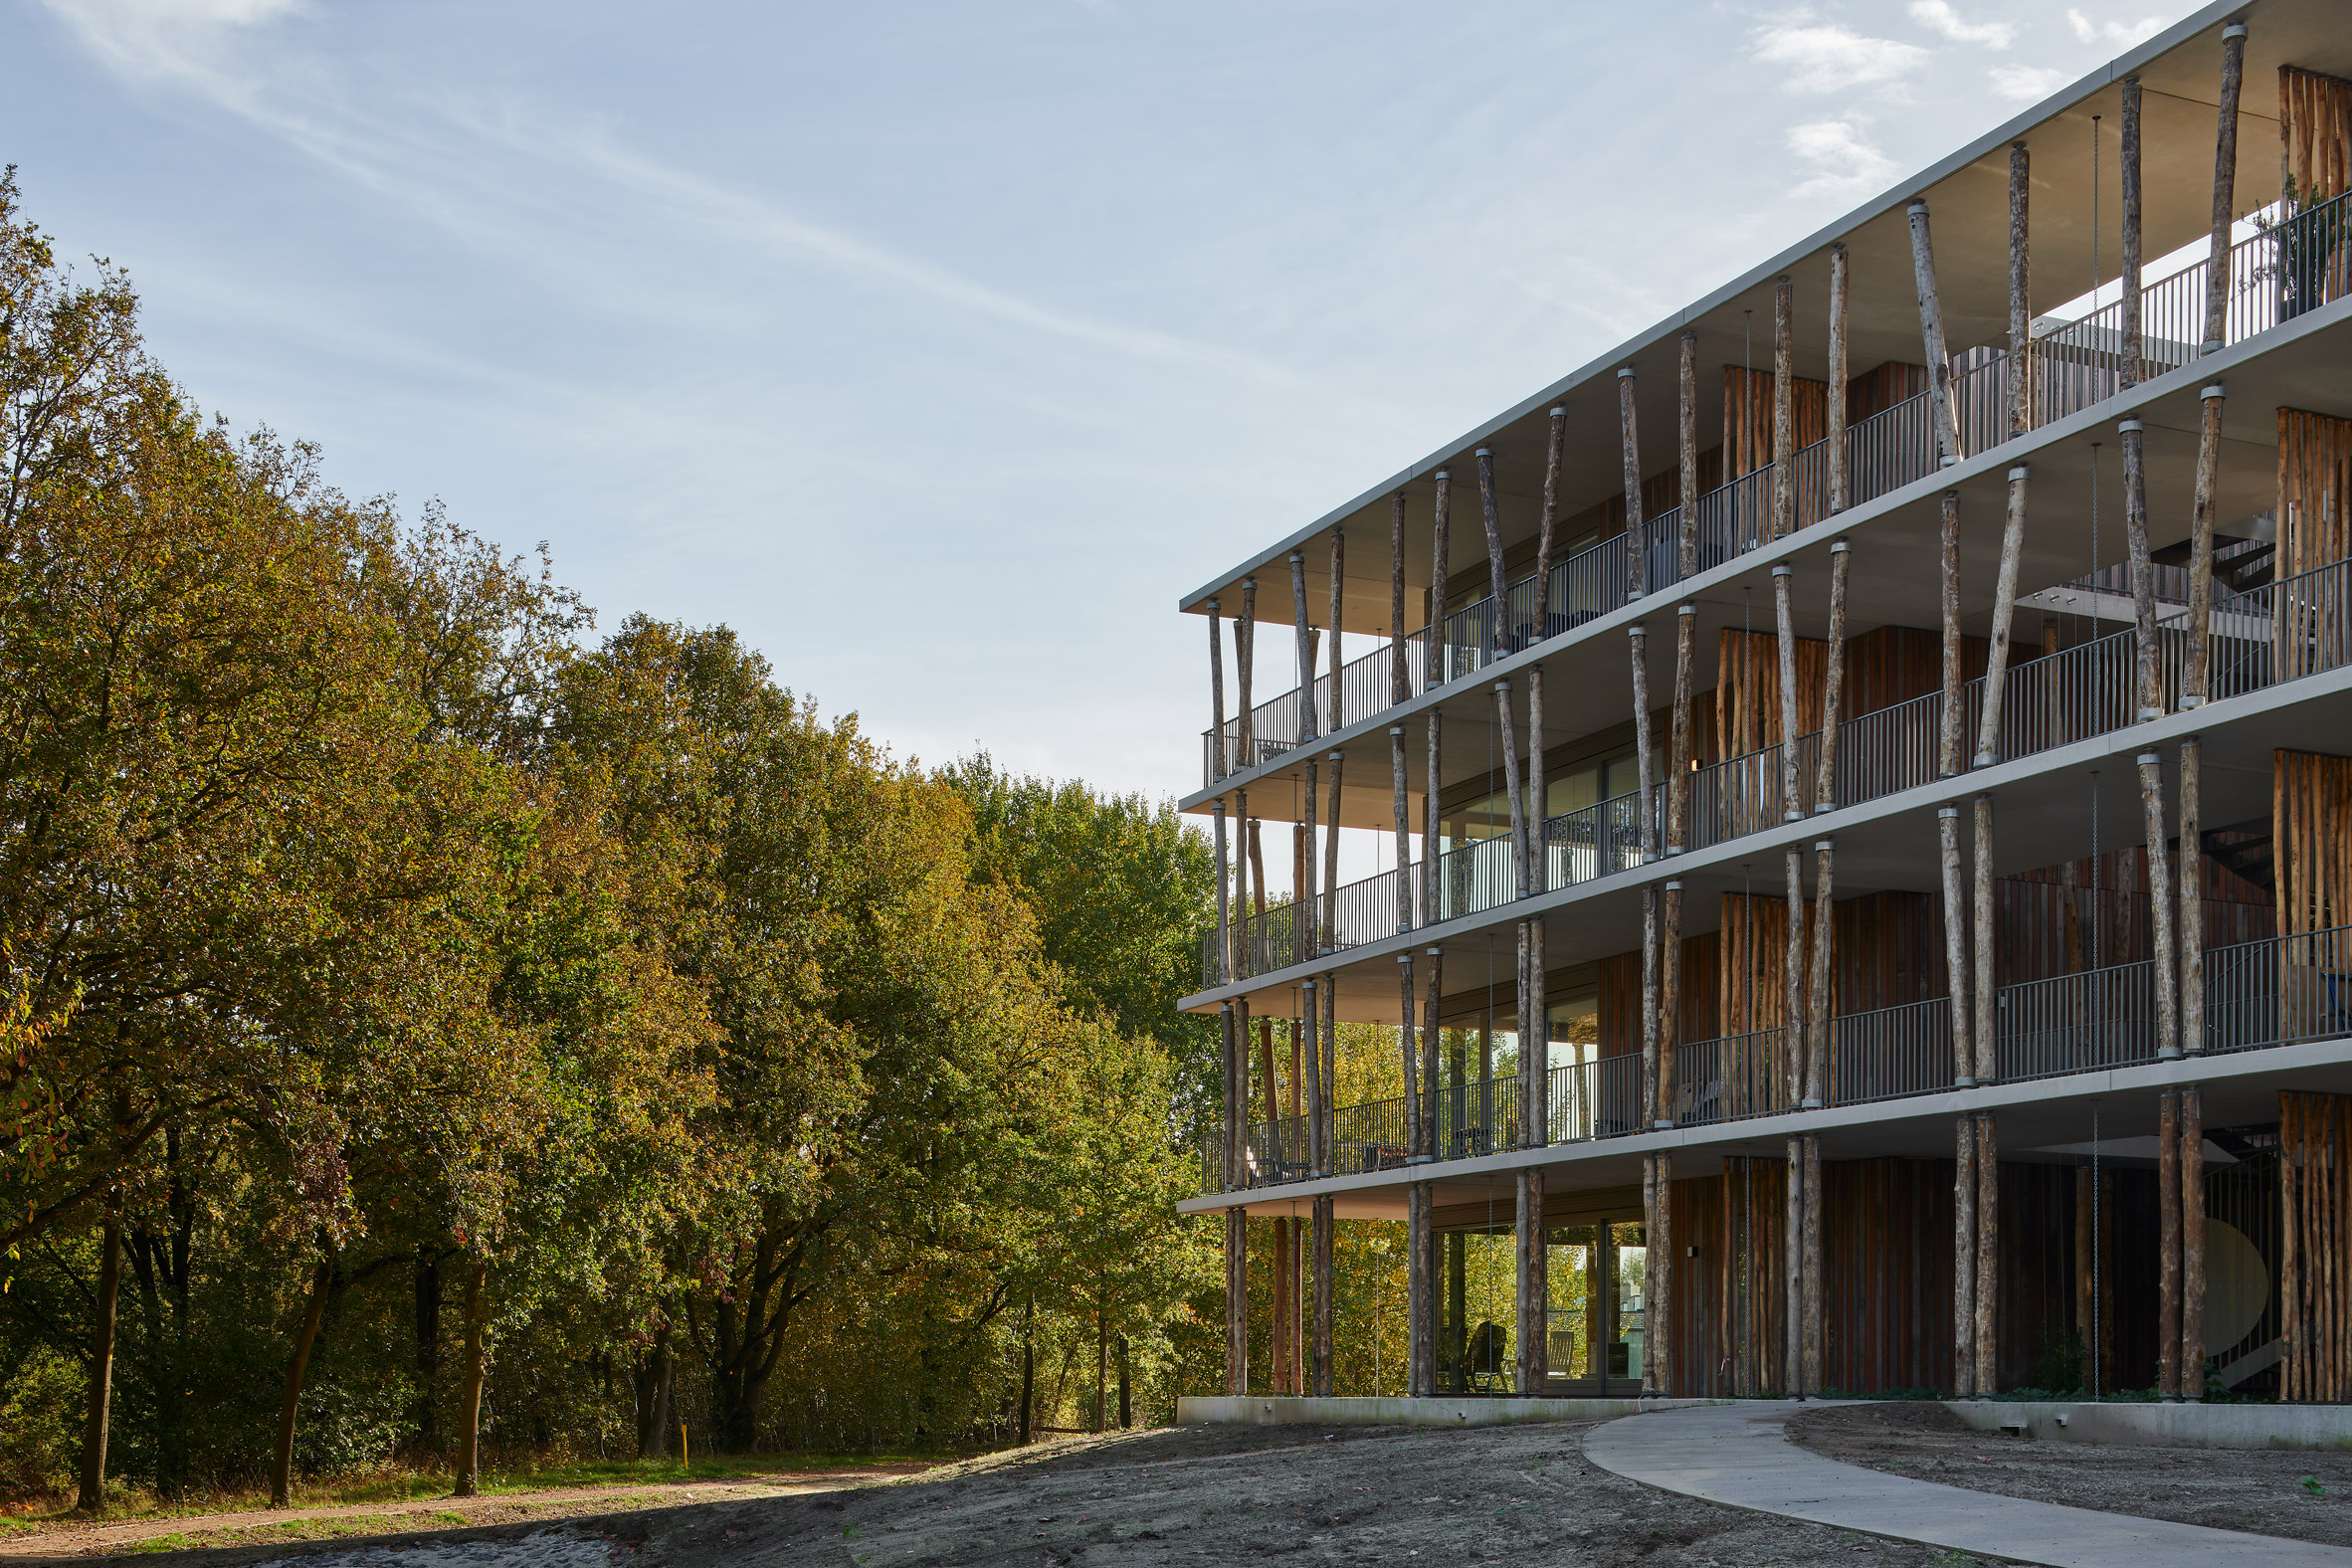 Housing in Eindhoven with tree-trunk columns